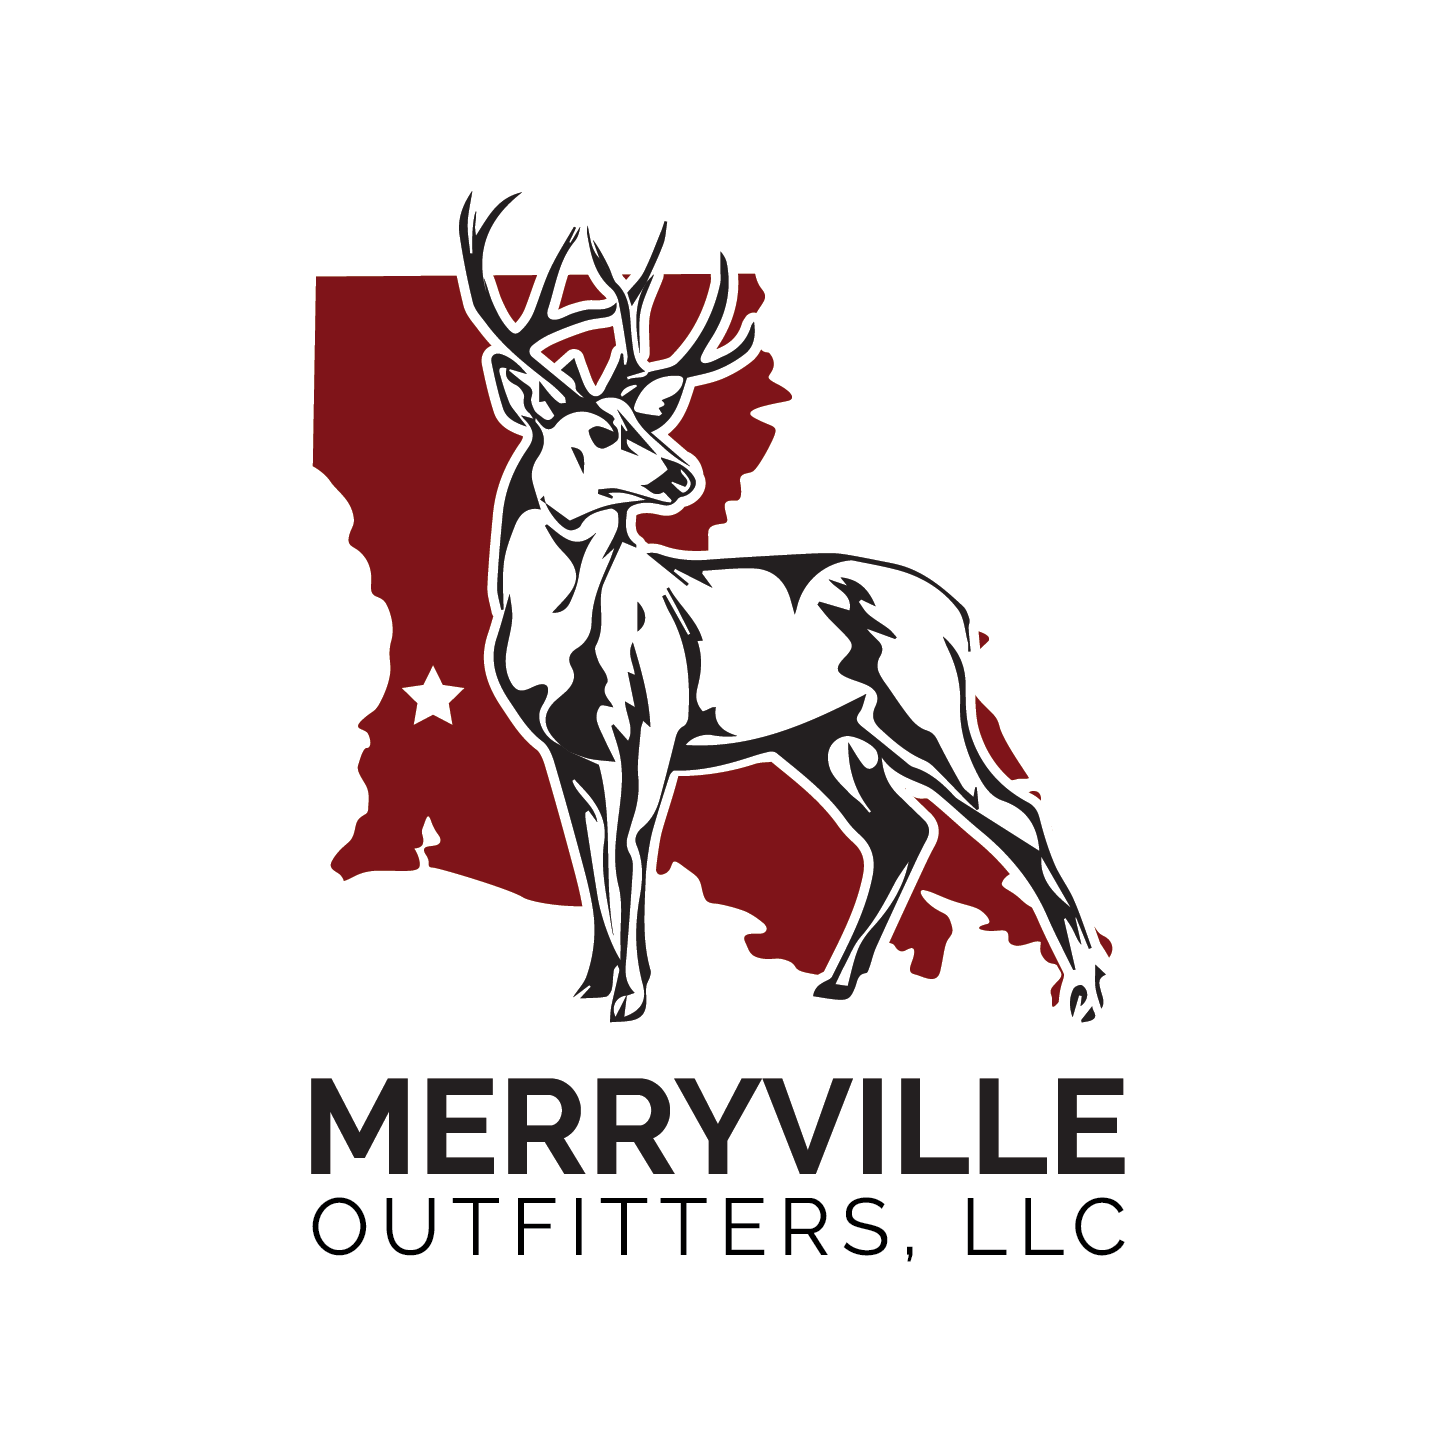 Merryville Outfitters, LLC.